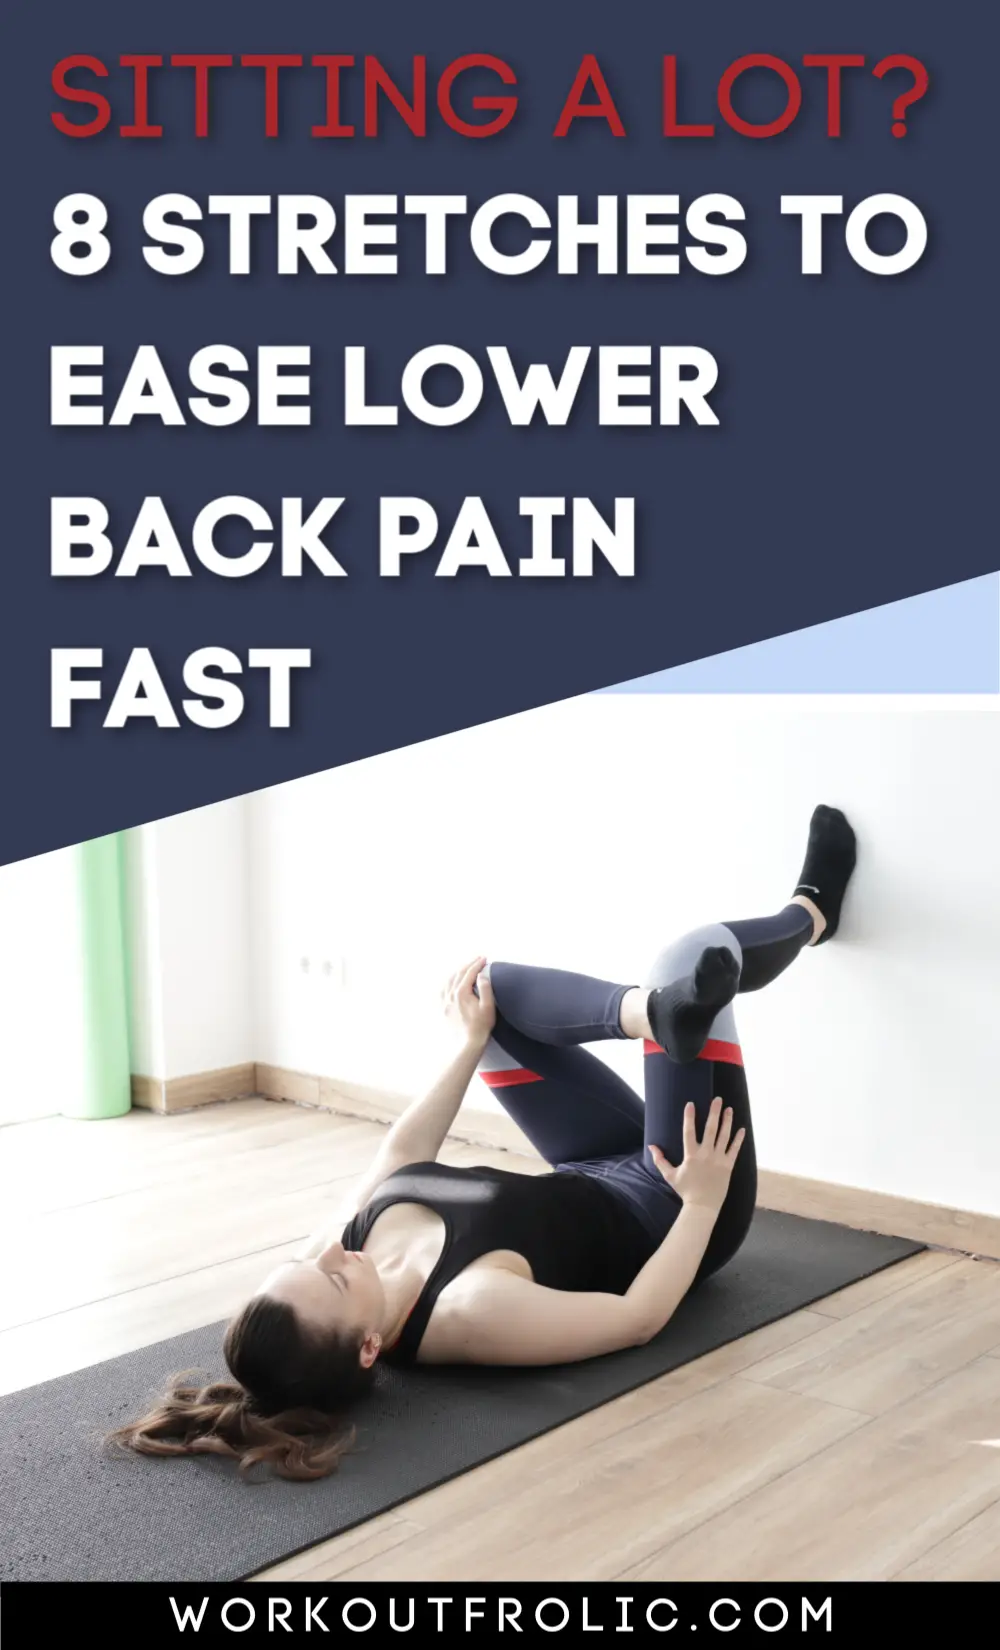 8 Lower back stretches to relieve tight and painful back